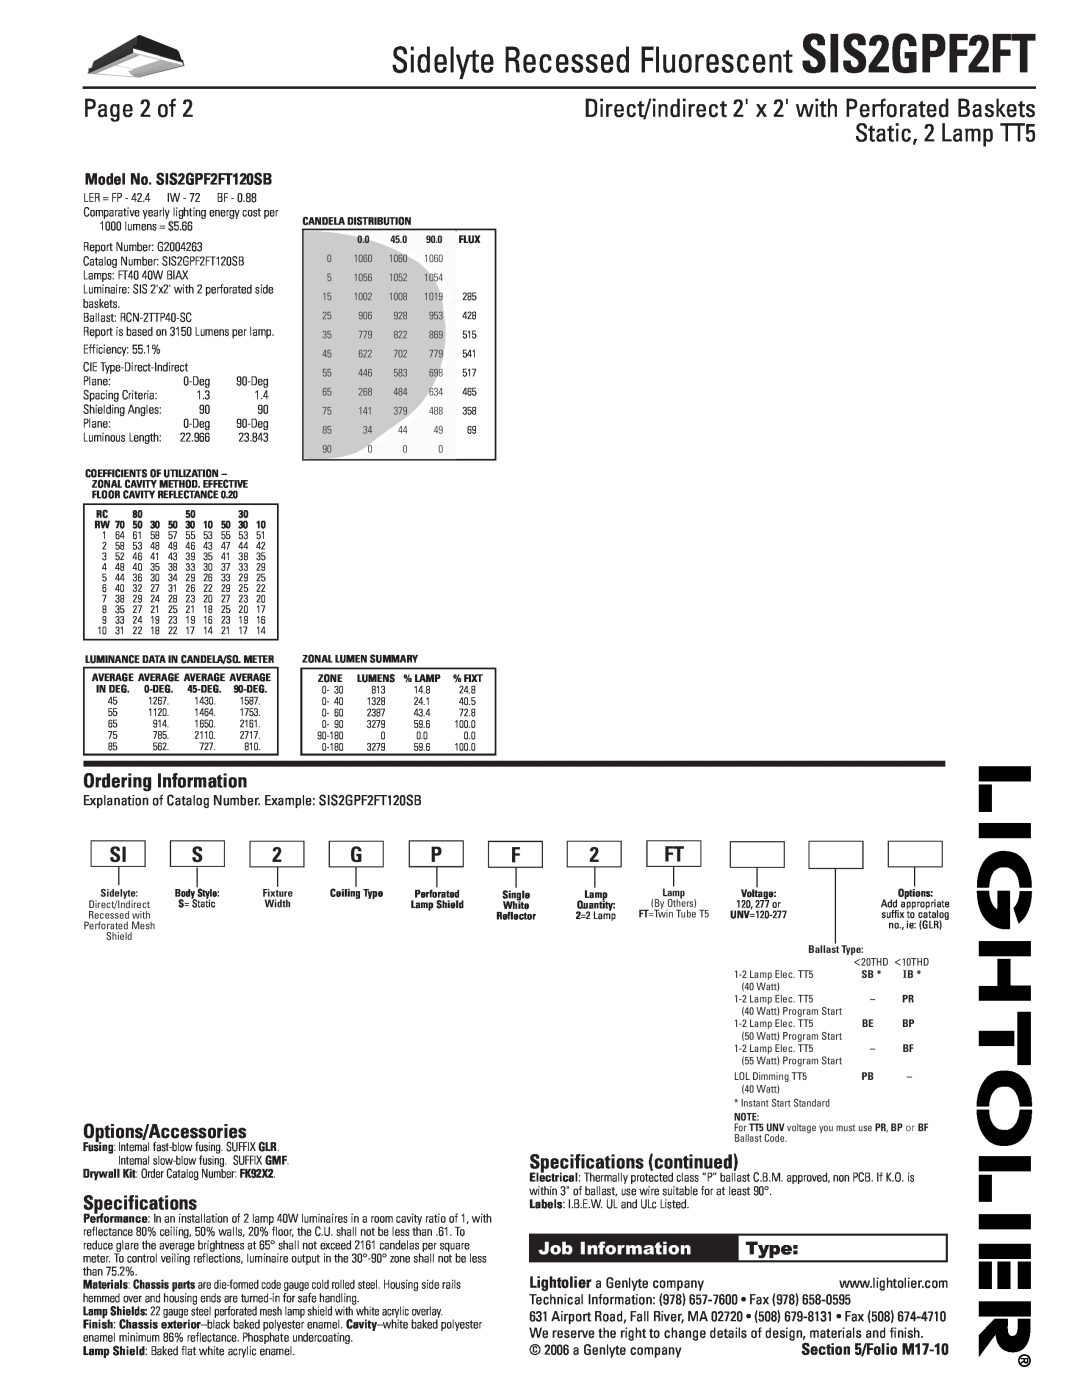 Lightolier SIS2GPF2FT Page 2 of, Direct/indirect 2 x 2 with Perforated Baskets, Ordering Information, Options/Accessories 